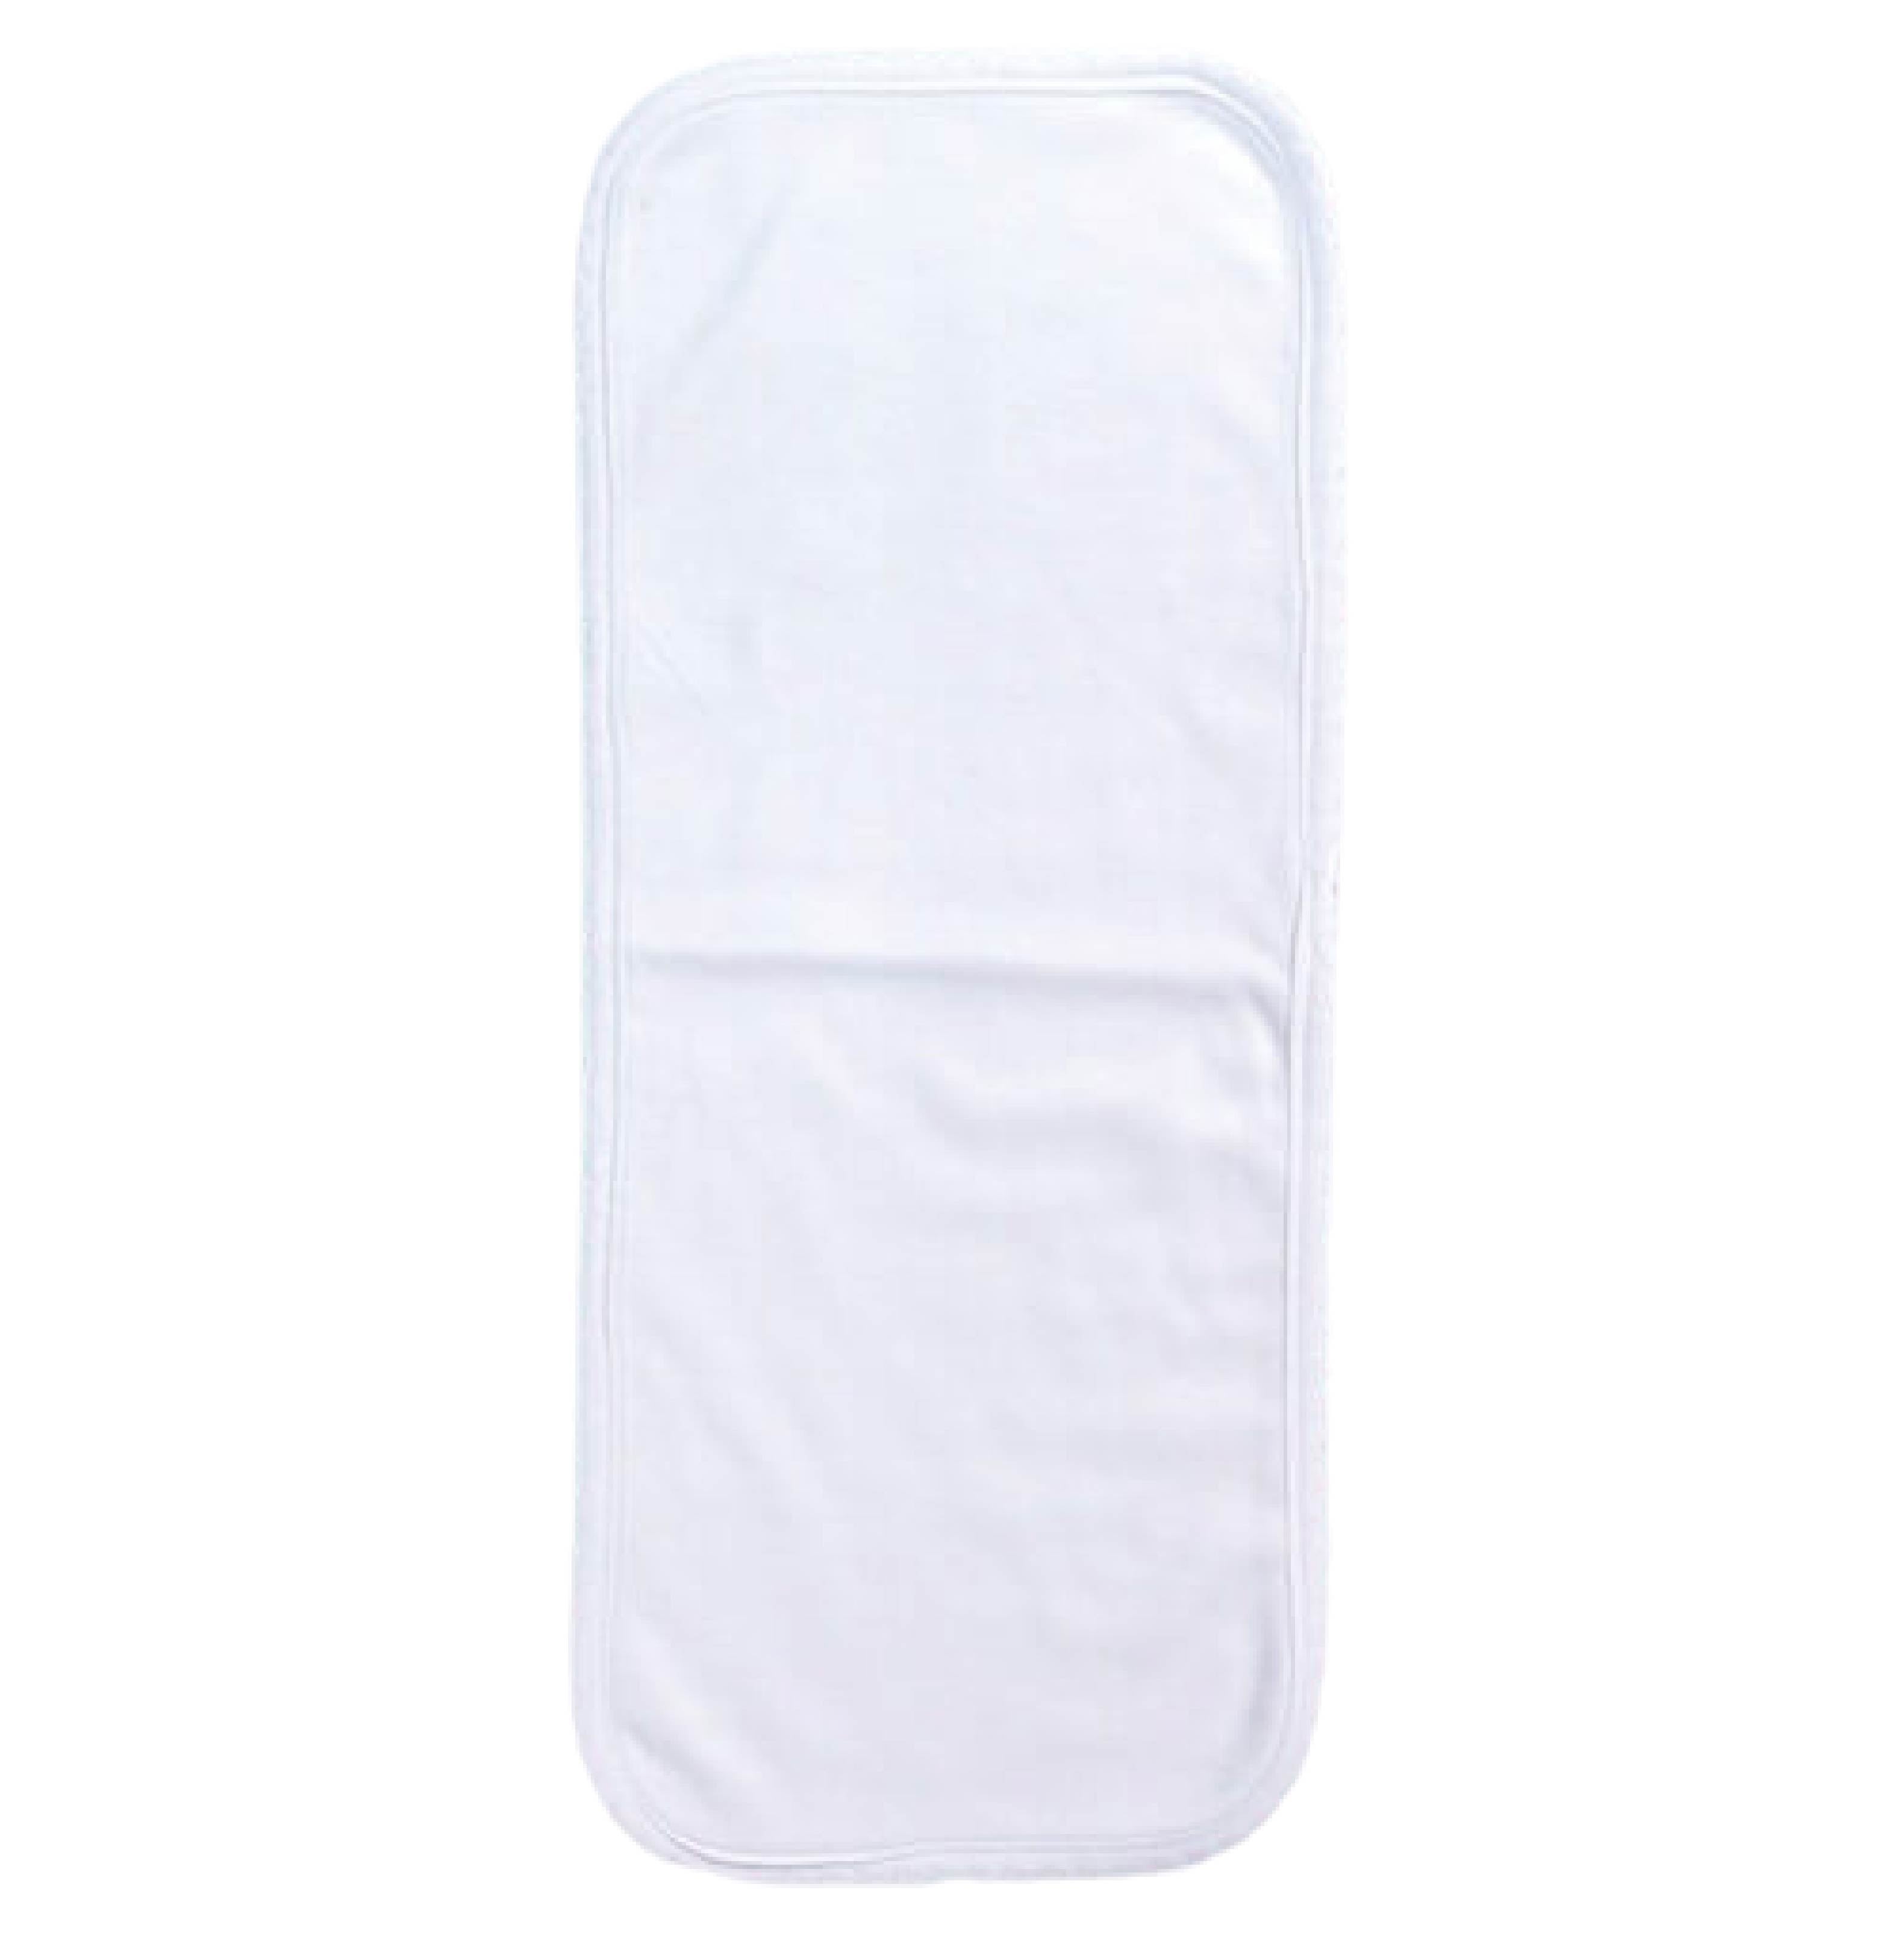 Sublimation Baby Burp Cloth with Scallop Trim (White), 65% Polyester / 35% Cotton